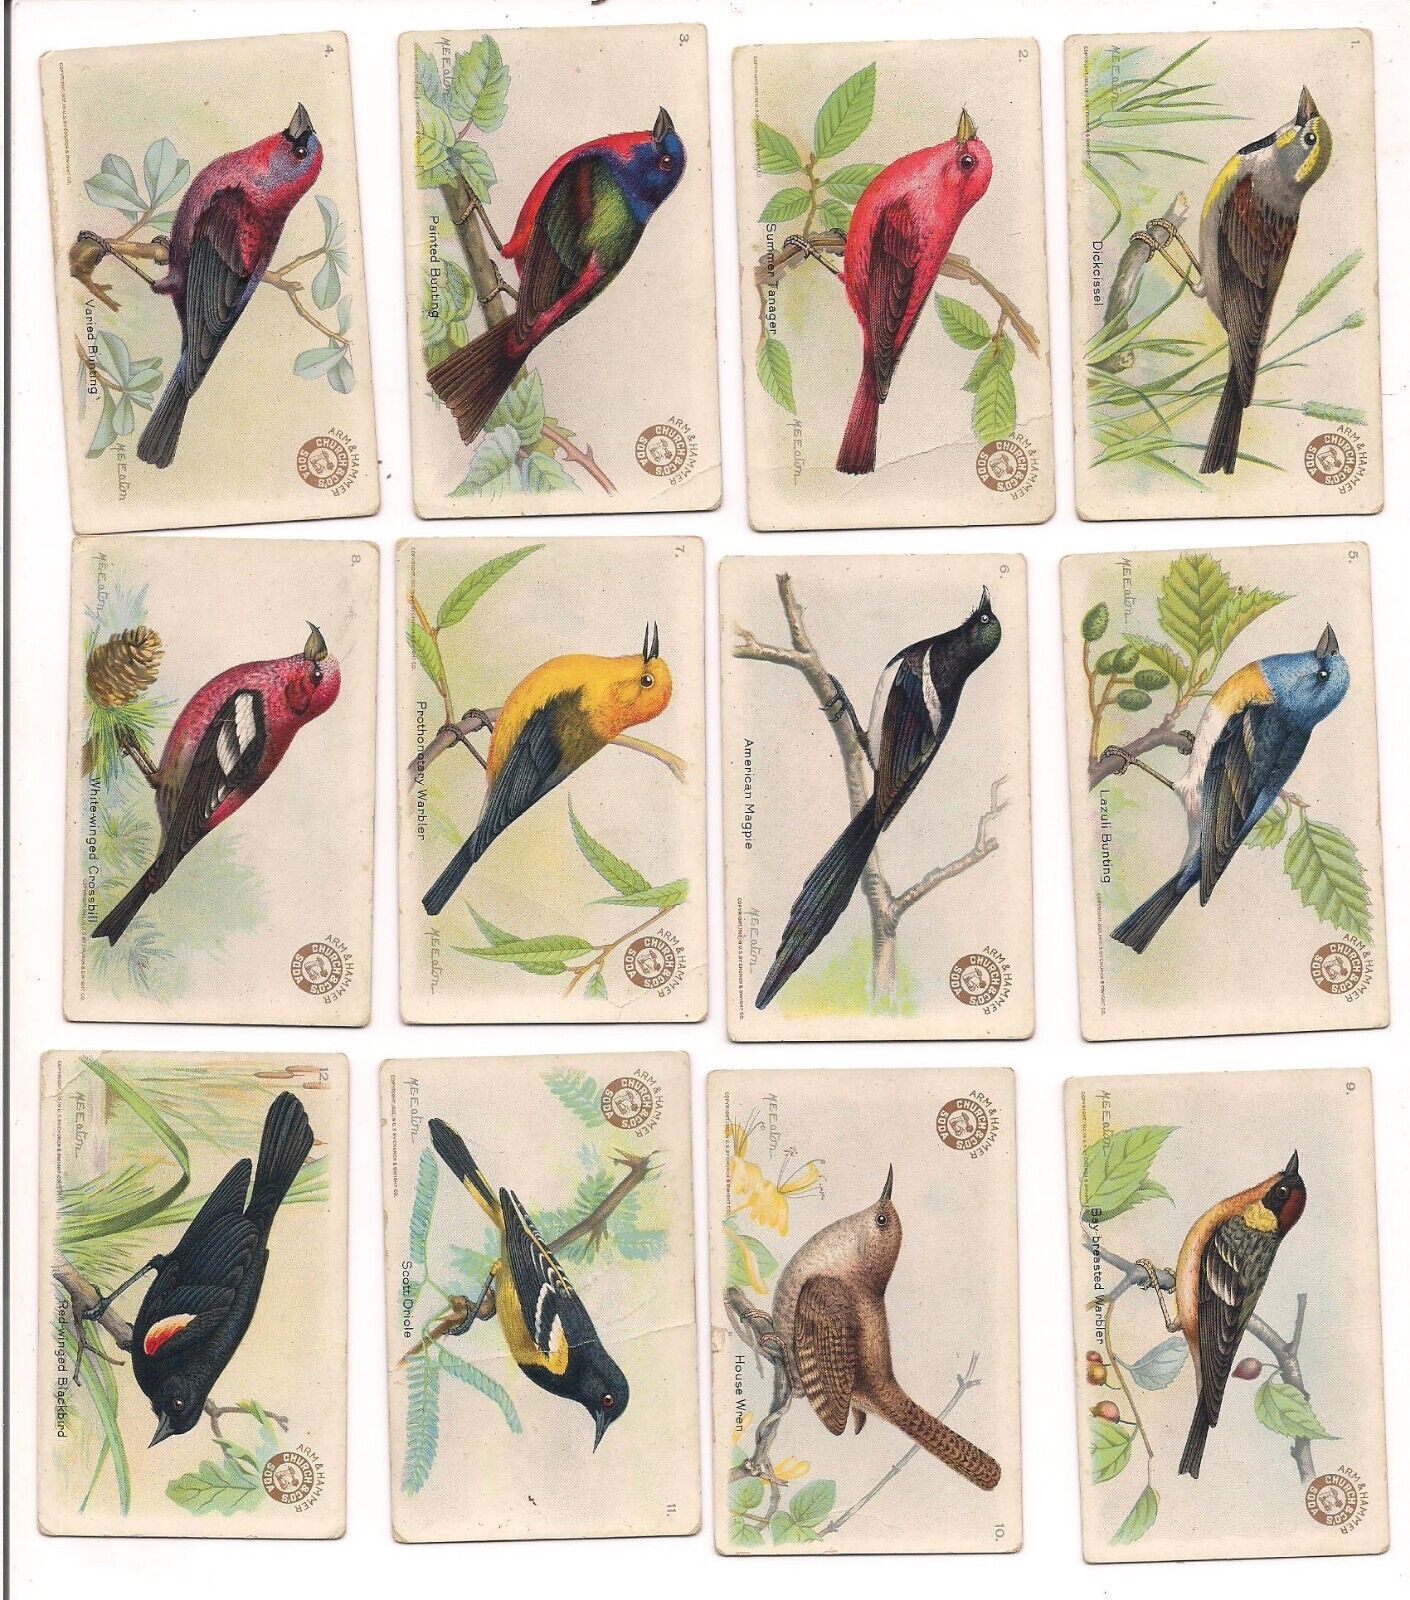 USEFUL BIRDS OF AMERICA THIRD SERIES OF 30 CARDS - MISSING ONE - #13